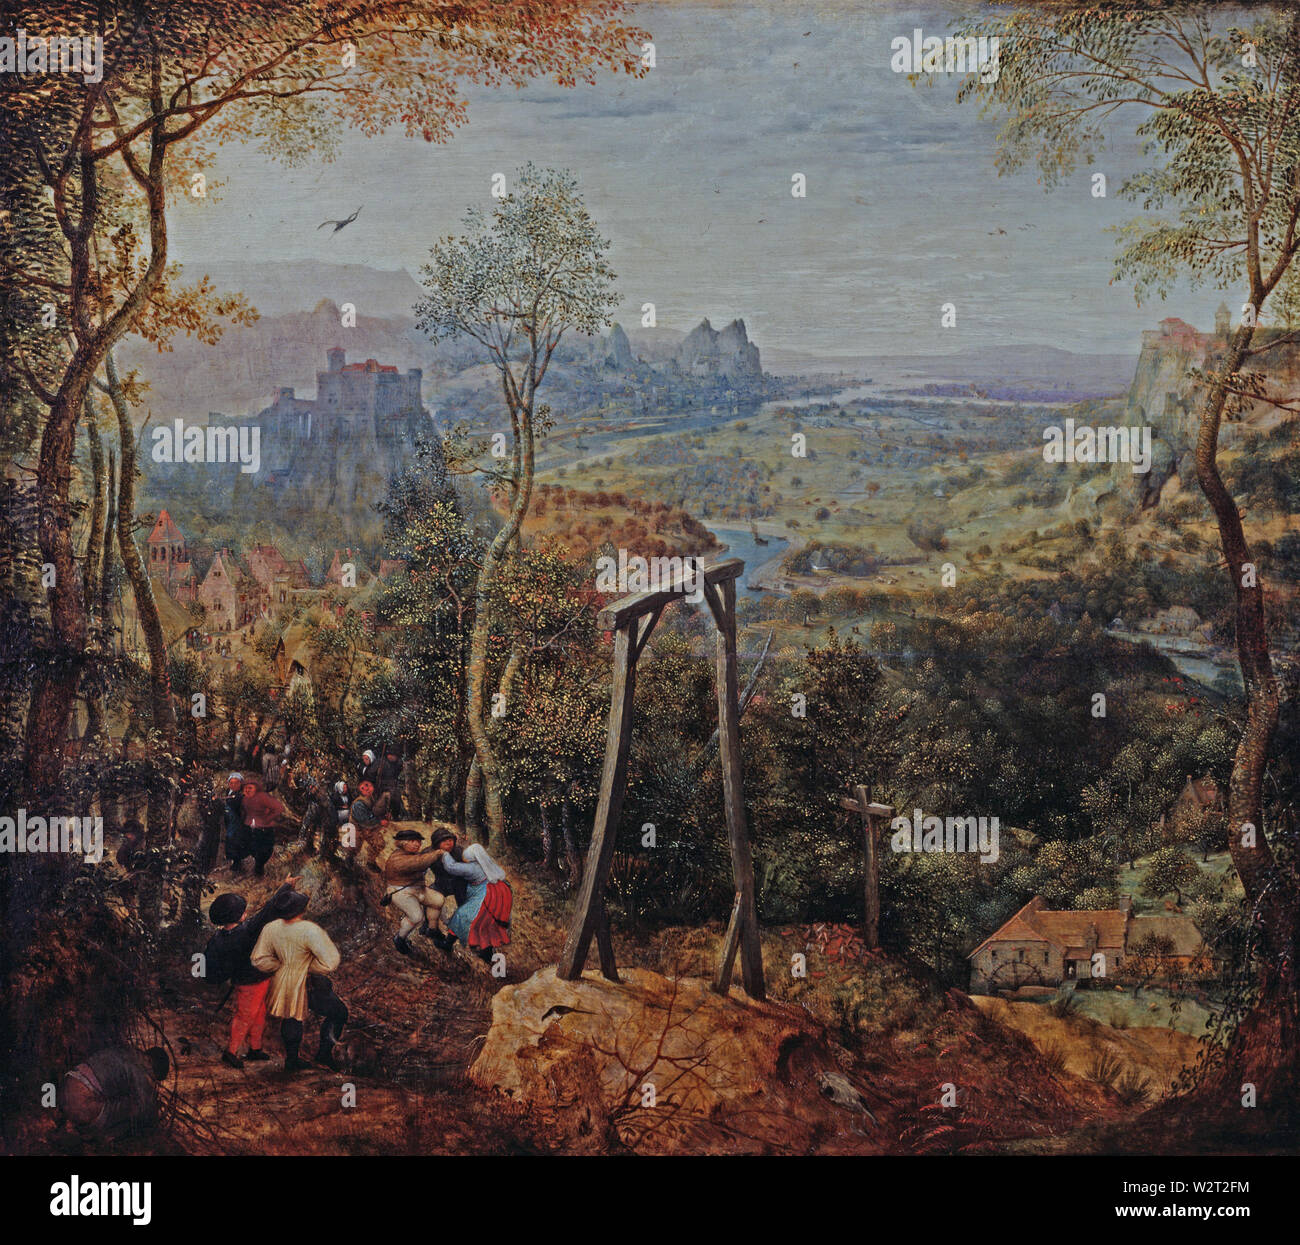 The Magpie on the Gallows (1568) painting by Pieter Bruegel (Brueghel) the Elder (I) Very high quality and resolution image Stock Photo